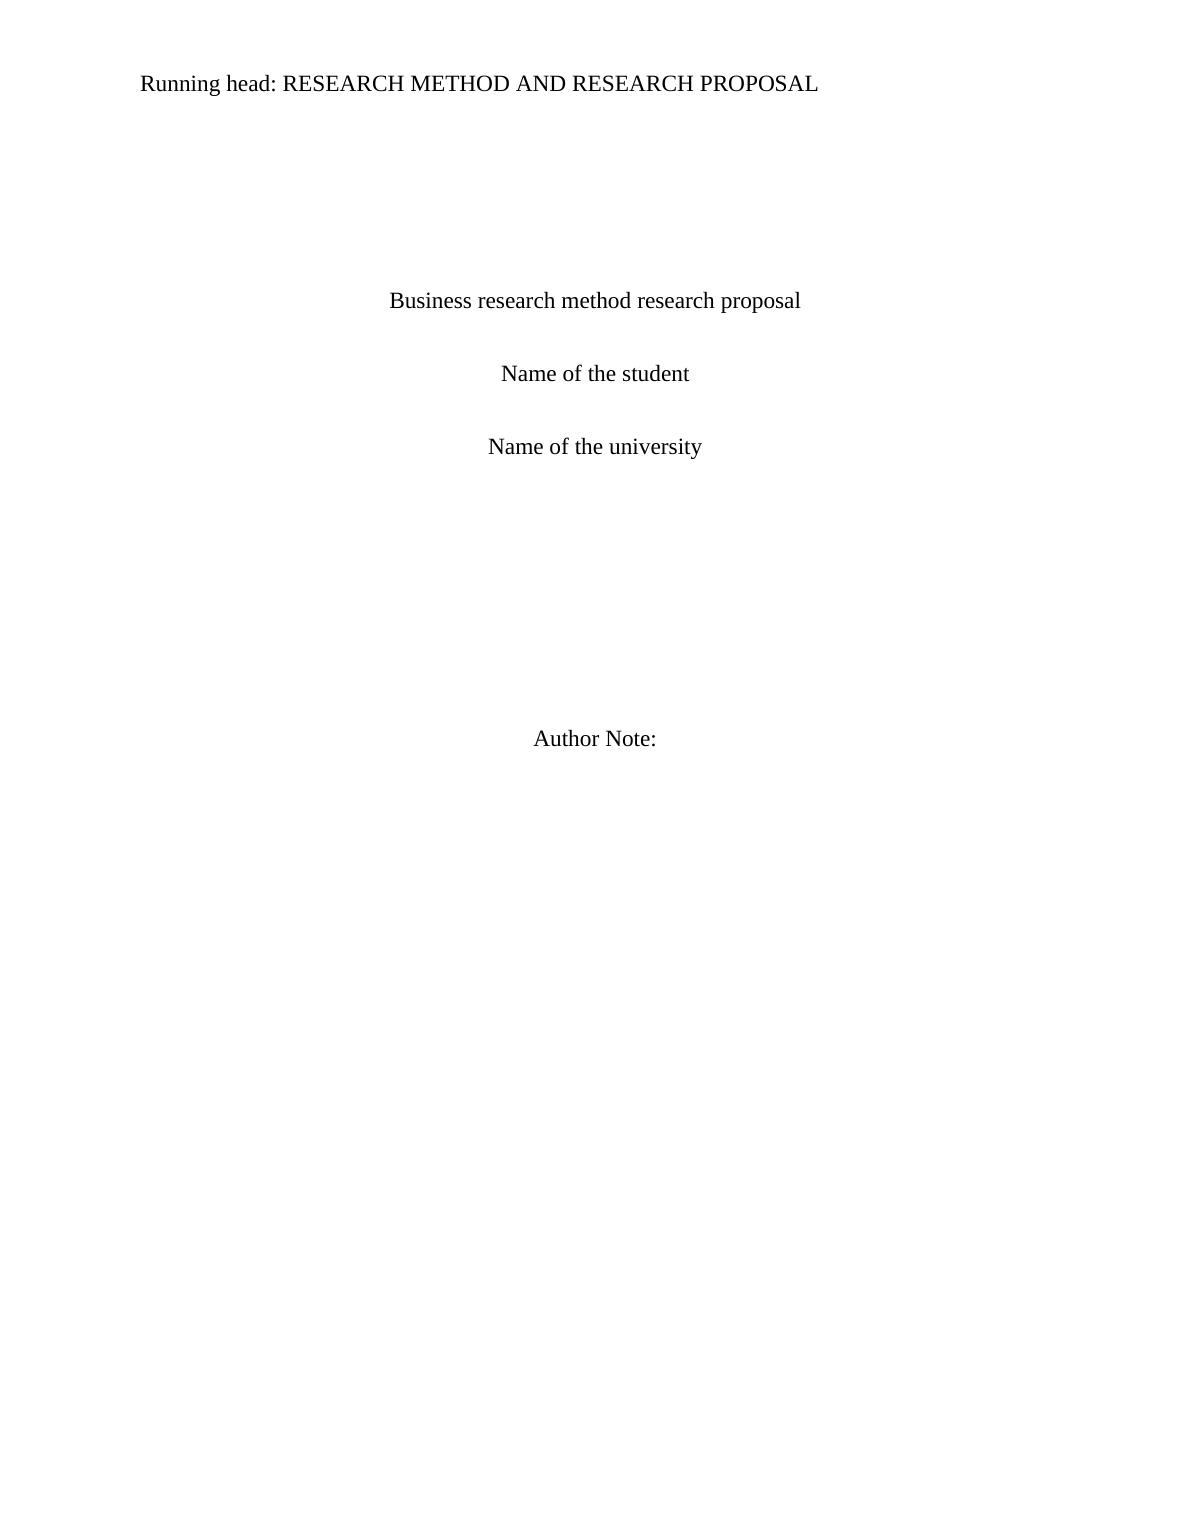 Business Research Method Research Proposal_1